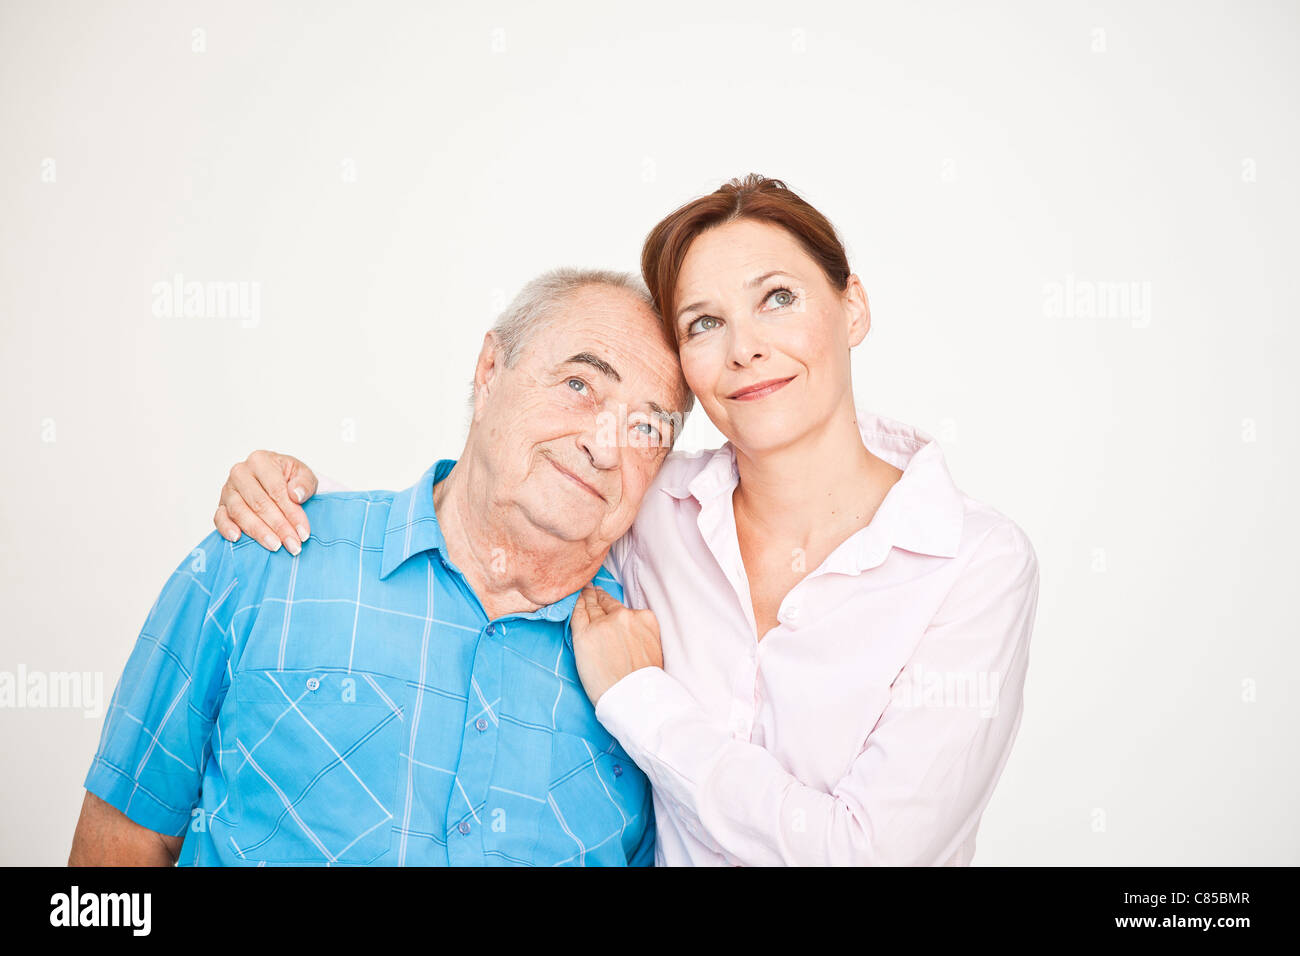 Portrait of Man and Woman Stock Photo